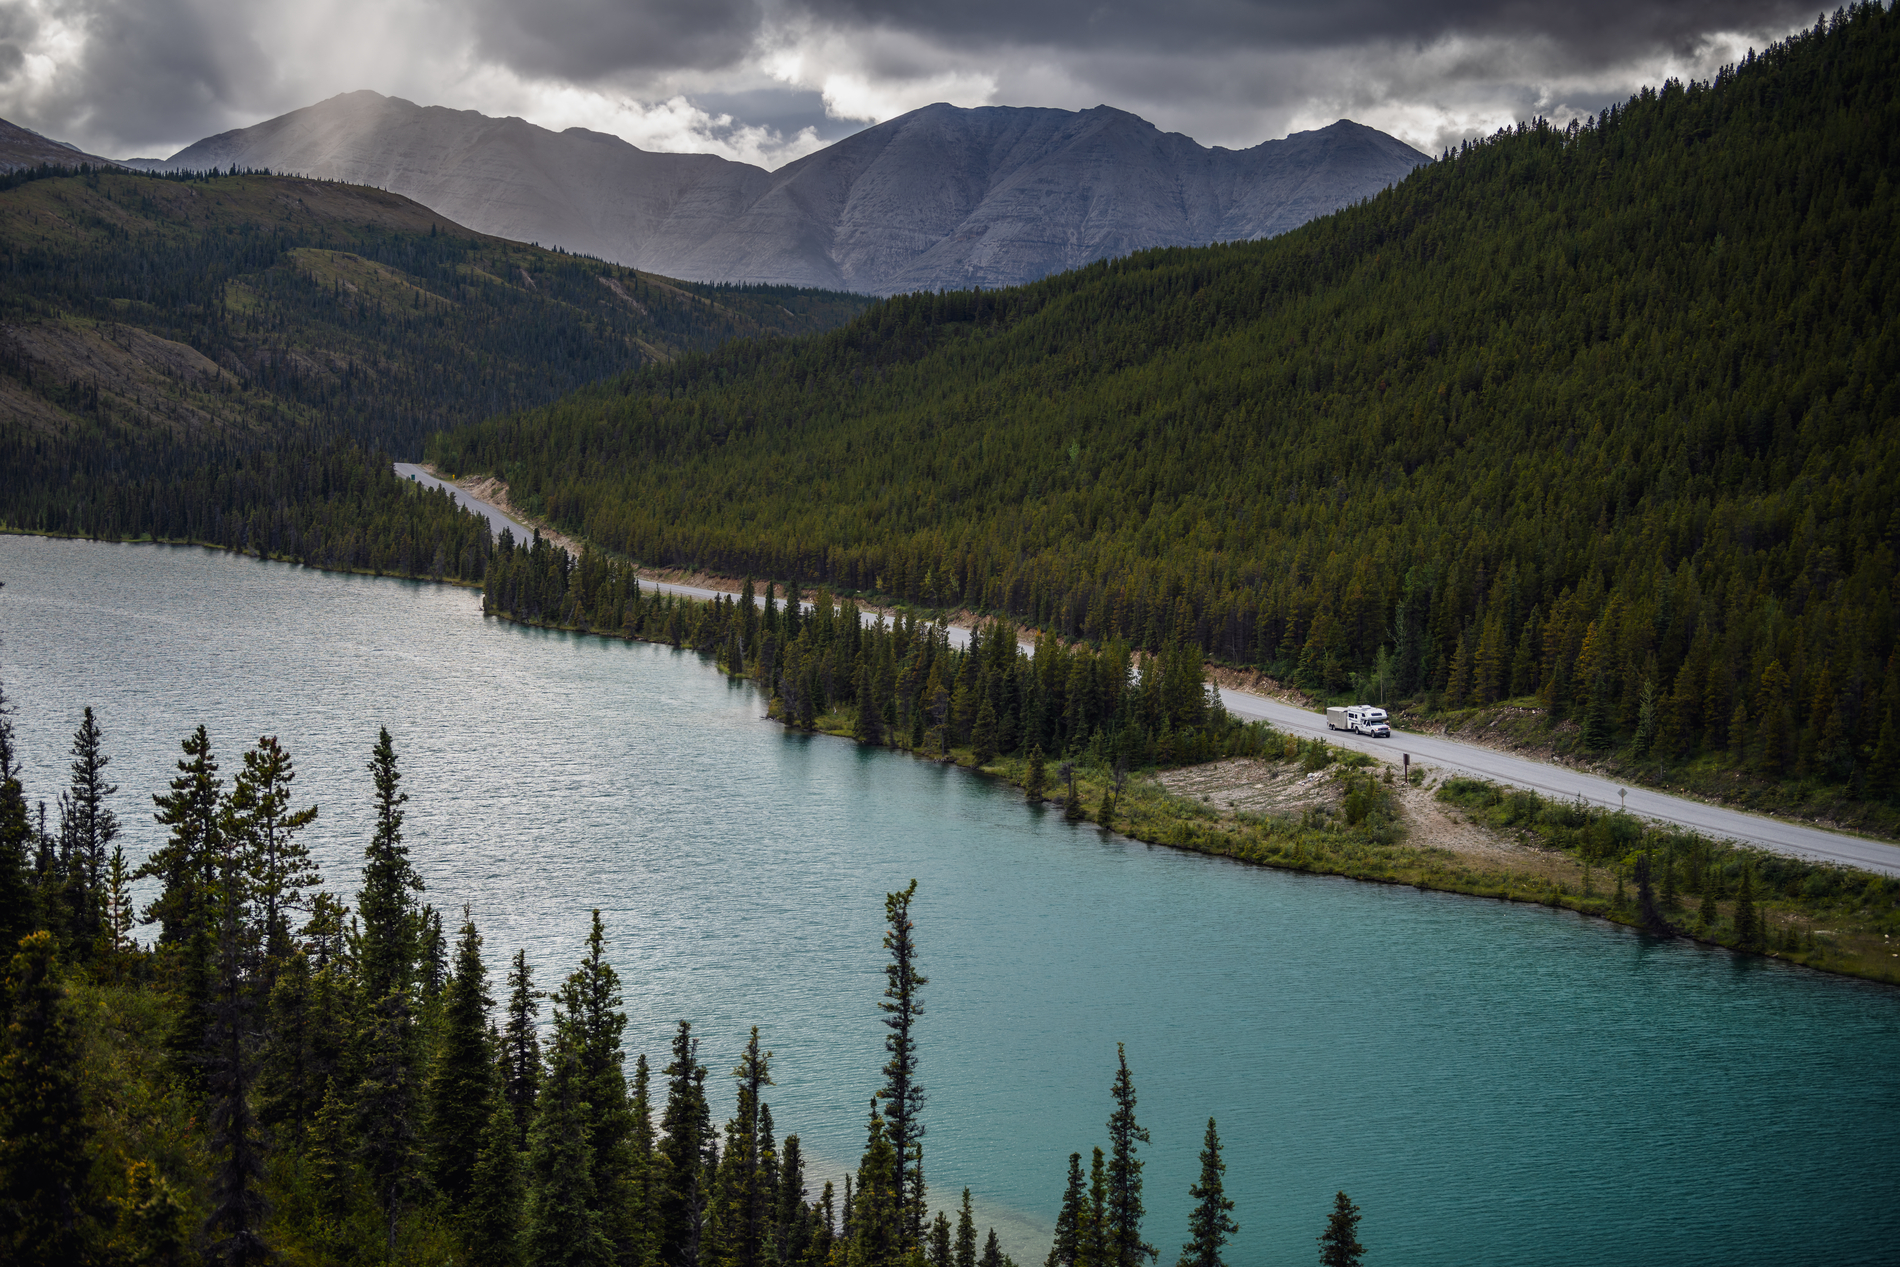 The Alaska Highway along Summit Lake in Stone Mountain Provincial Park | Northern BC Tourism/Andrew Strain